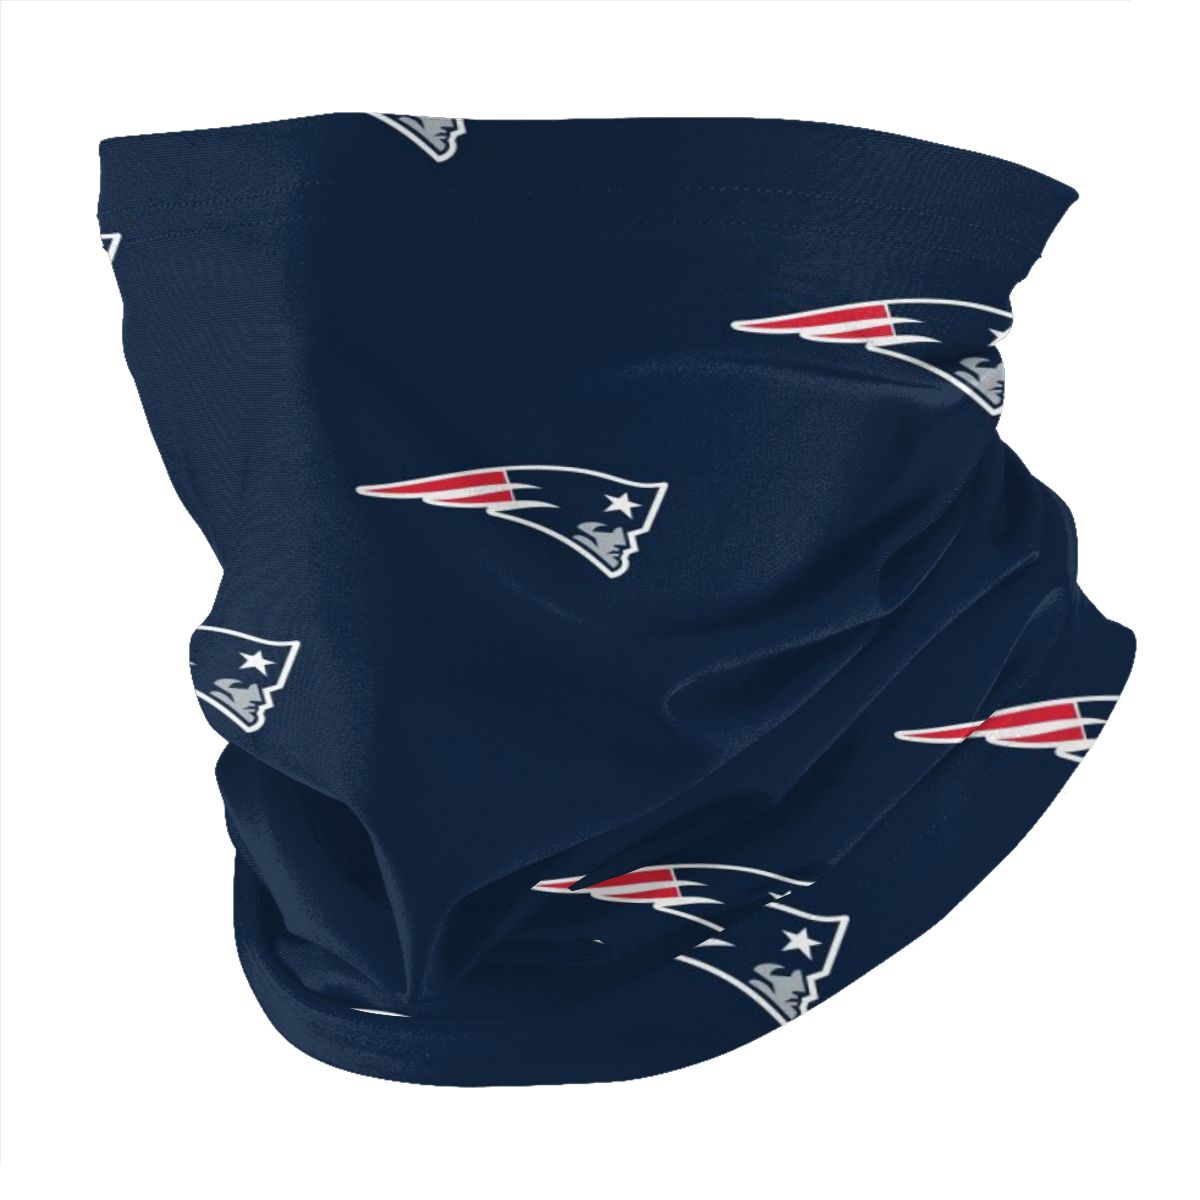 Reusble Mouth Cover Bandanas New England Patriots Variety Head Scarf Face Mask With PM 2.5 Filter